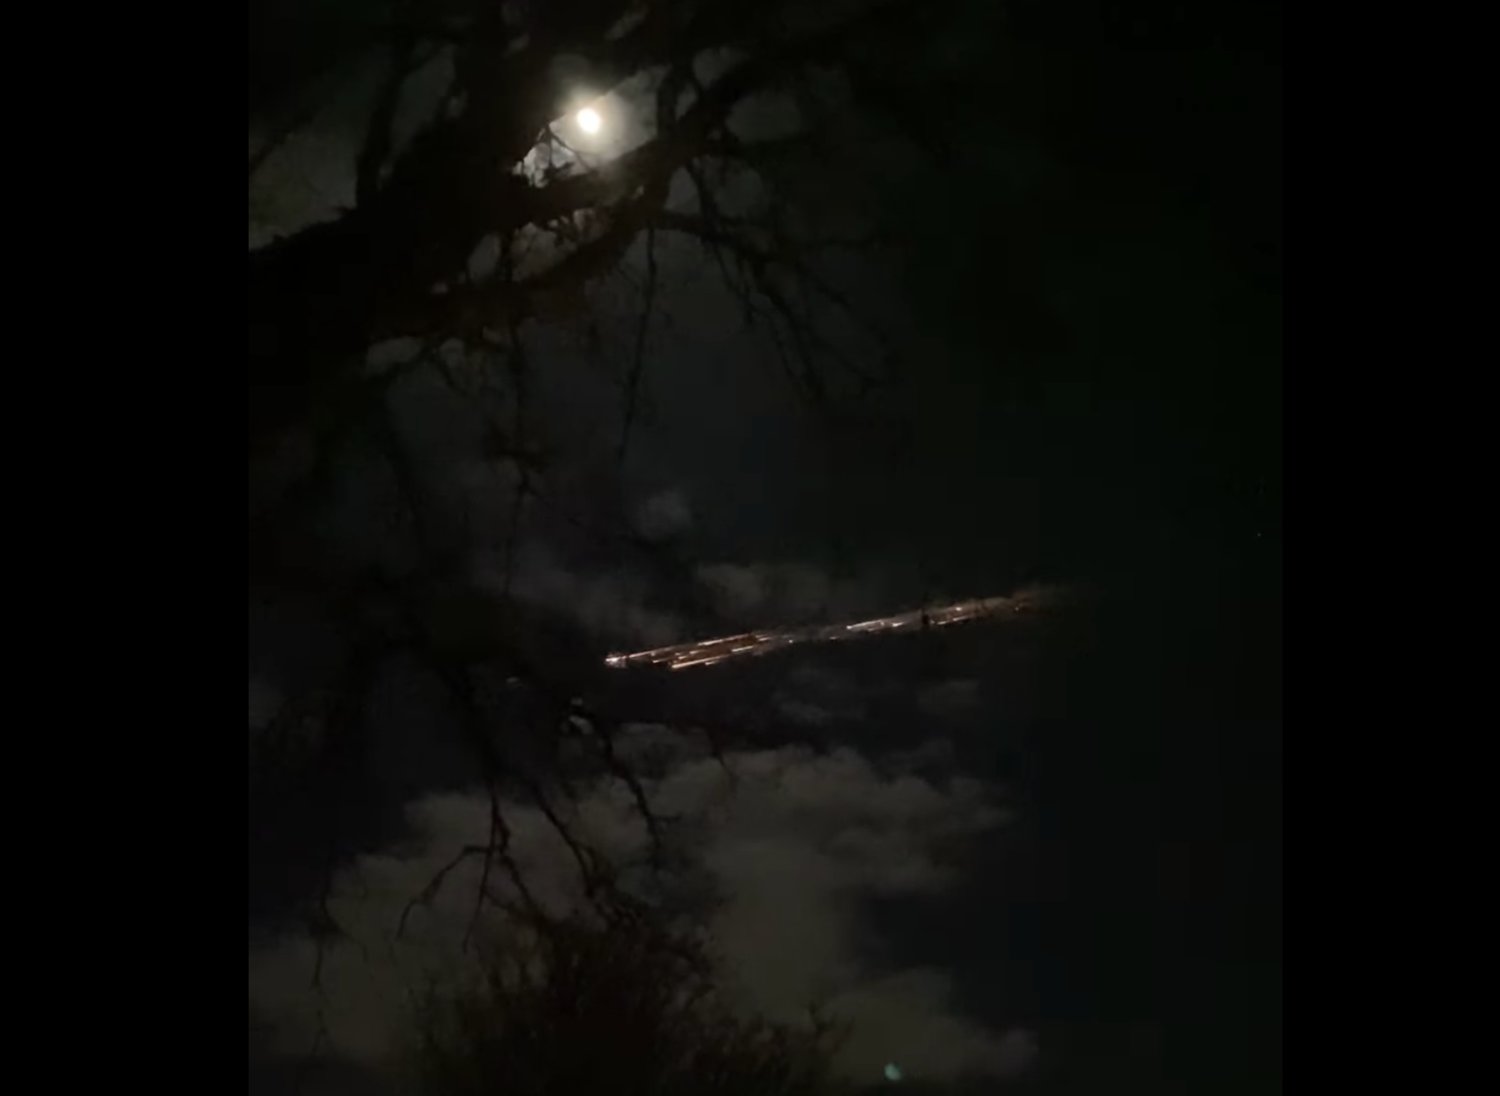 A SpaceX rocket booster falling out of orbit made for a spectacular display over much of the Pacific Northwest last Thursday night, prompting calls to authorities and excited posts to social media. This image is from a video recorded by CT Publishing Vice President Franklin Taylor.